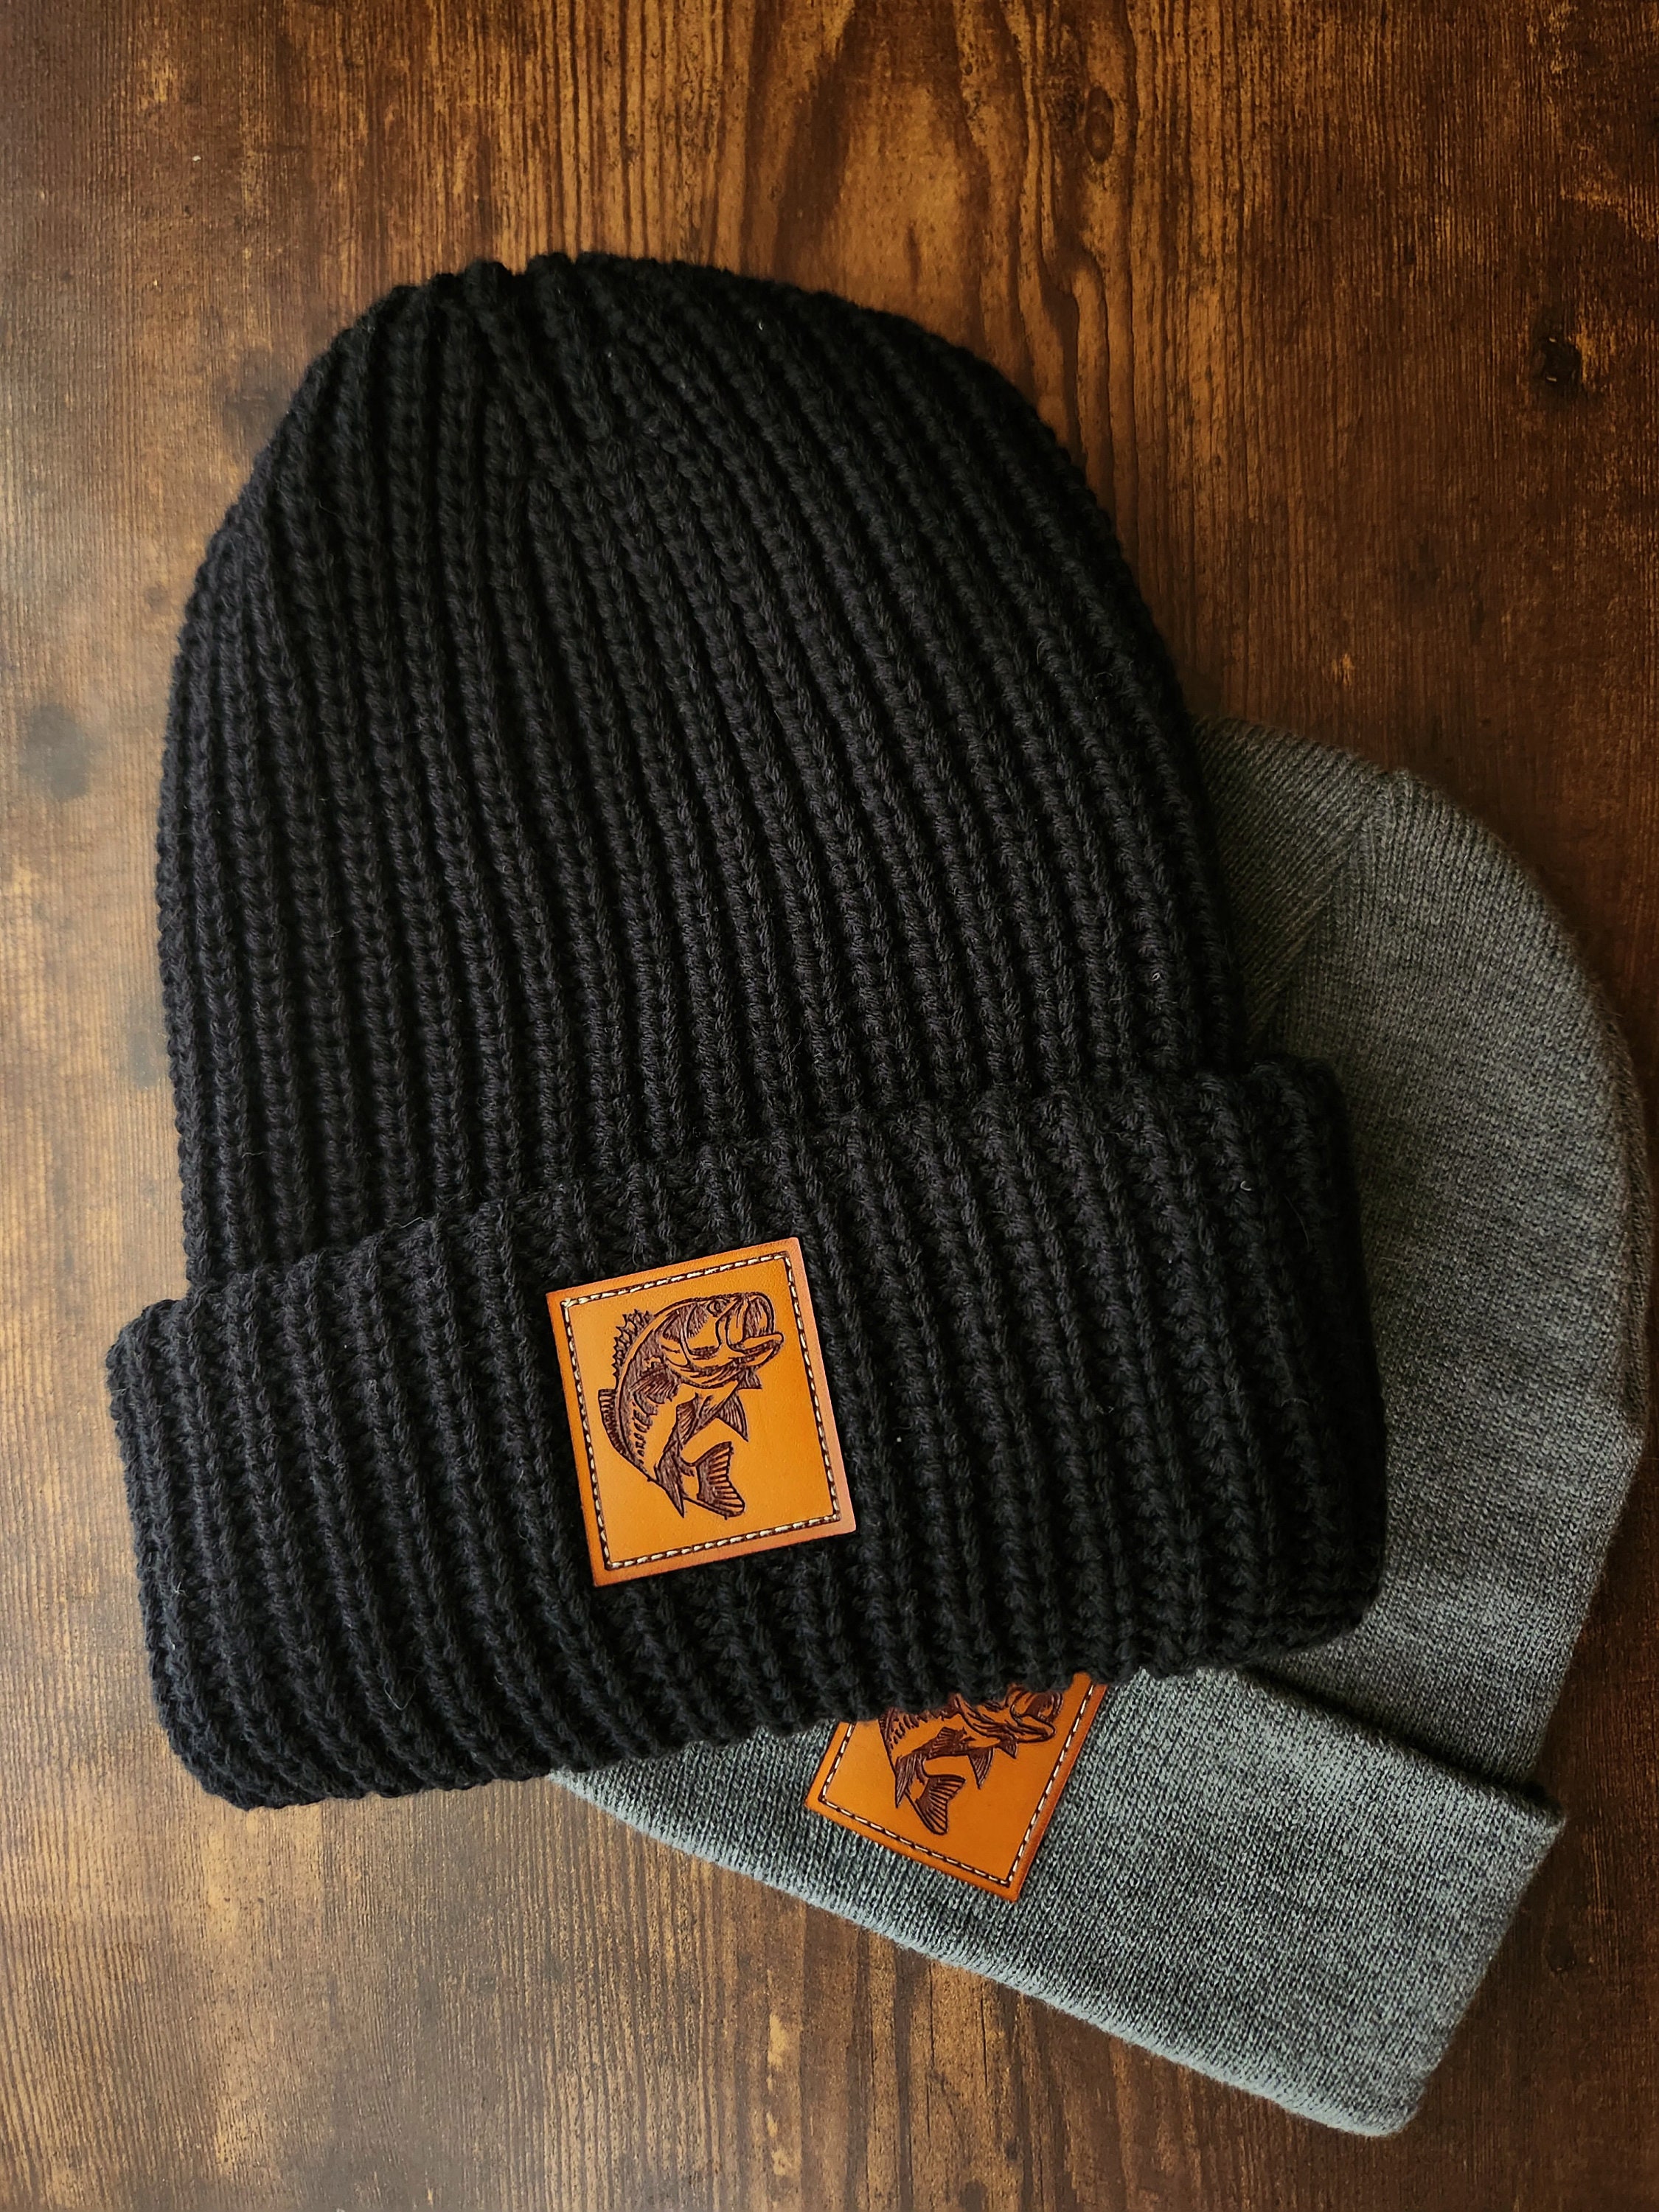 Bass Ice Fishing Winter Hat Knit and Beanie Style 